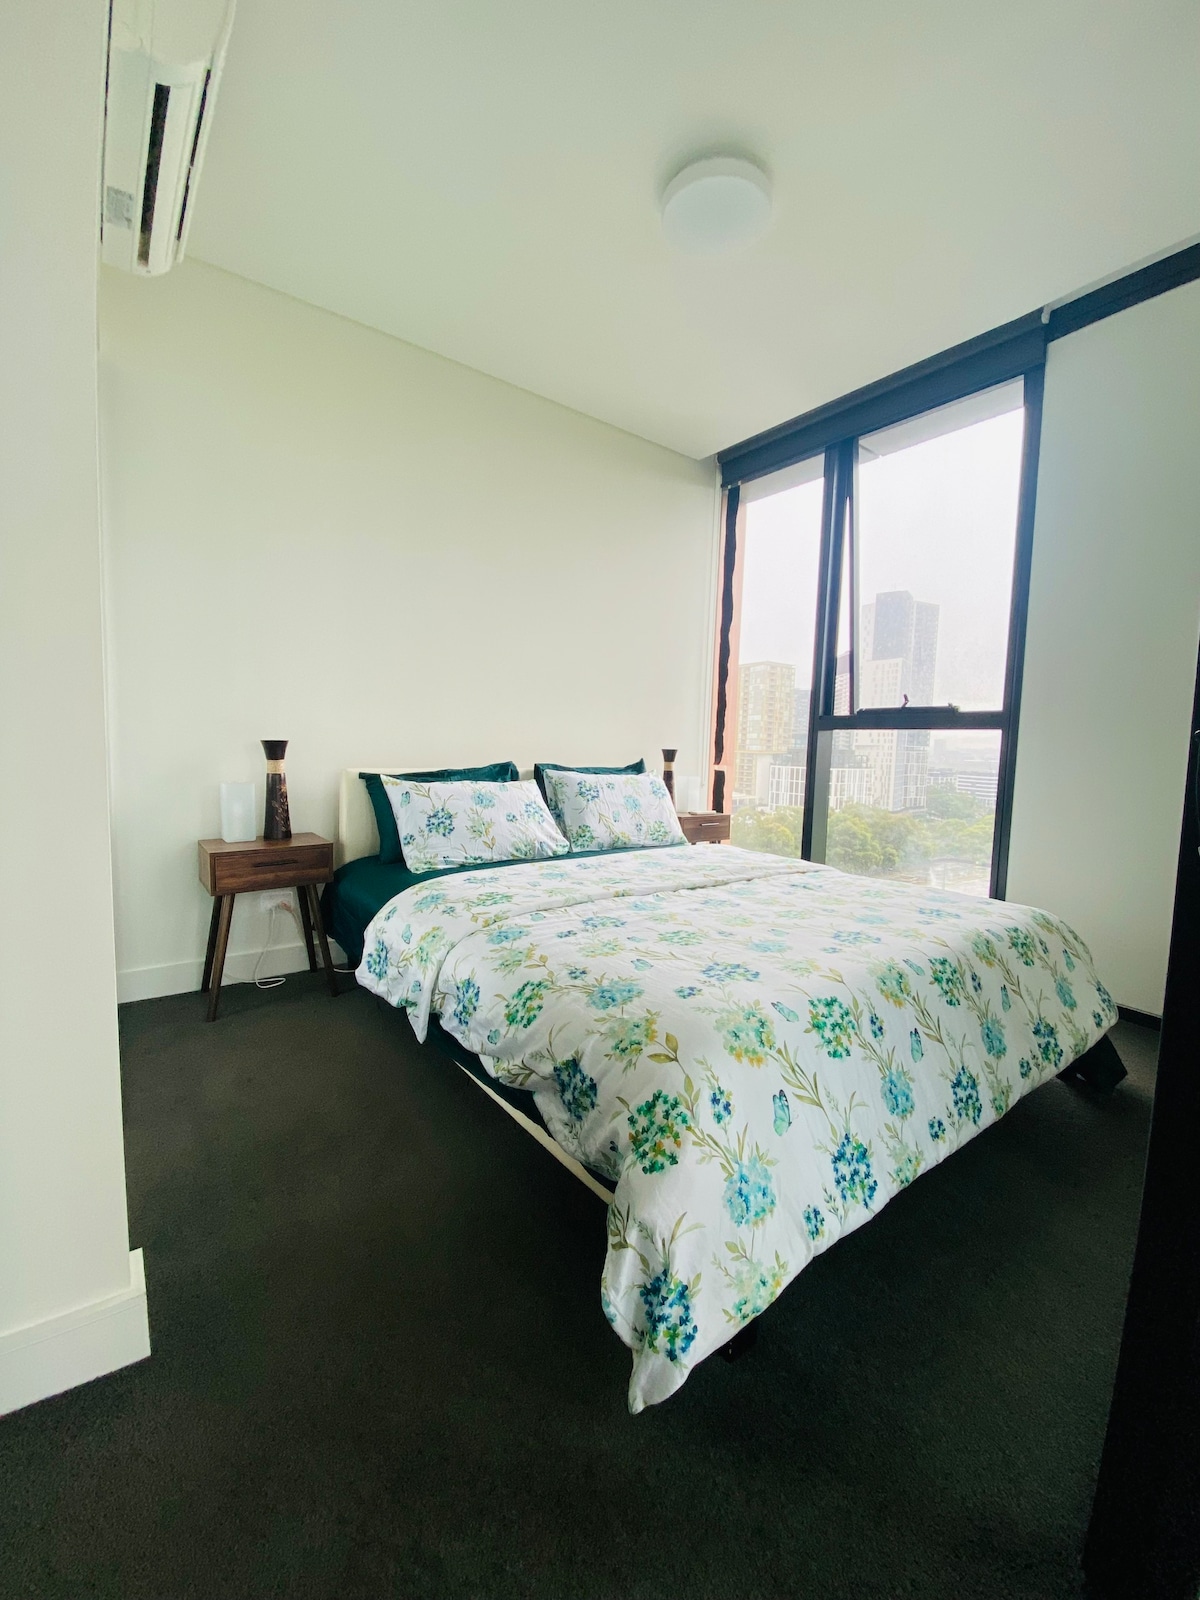 Homely city view room